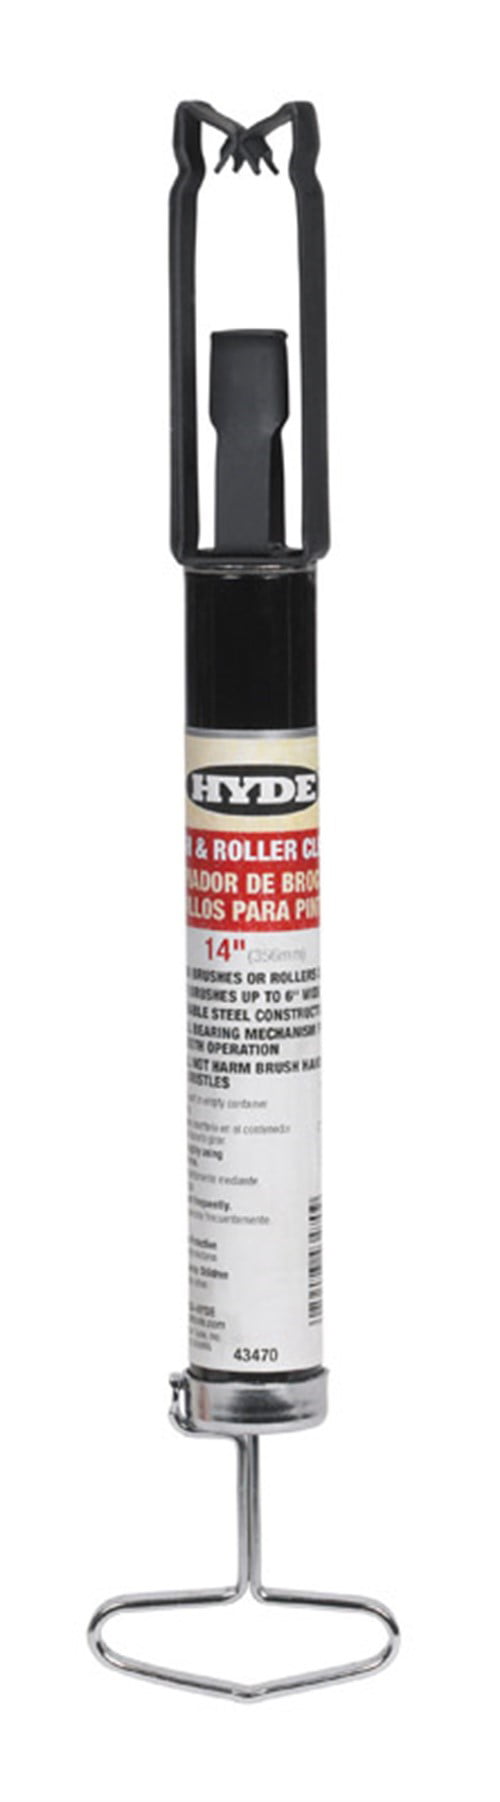 Hyde Tools 43470 Paint Brush/Roller Cleaner 